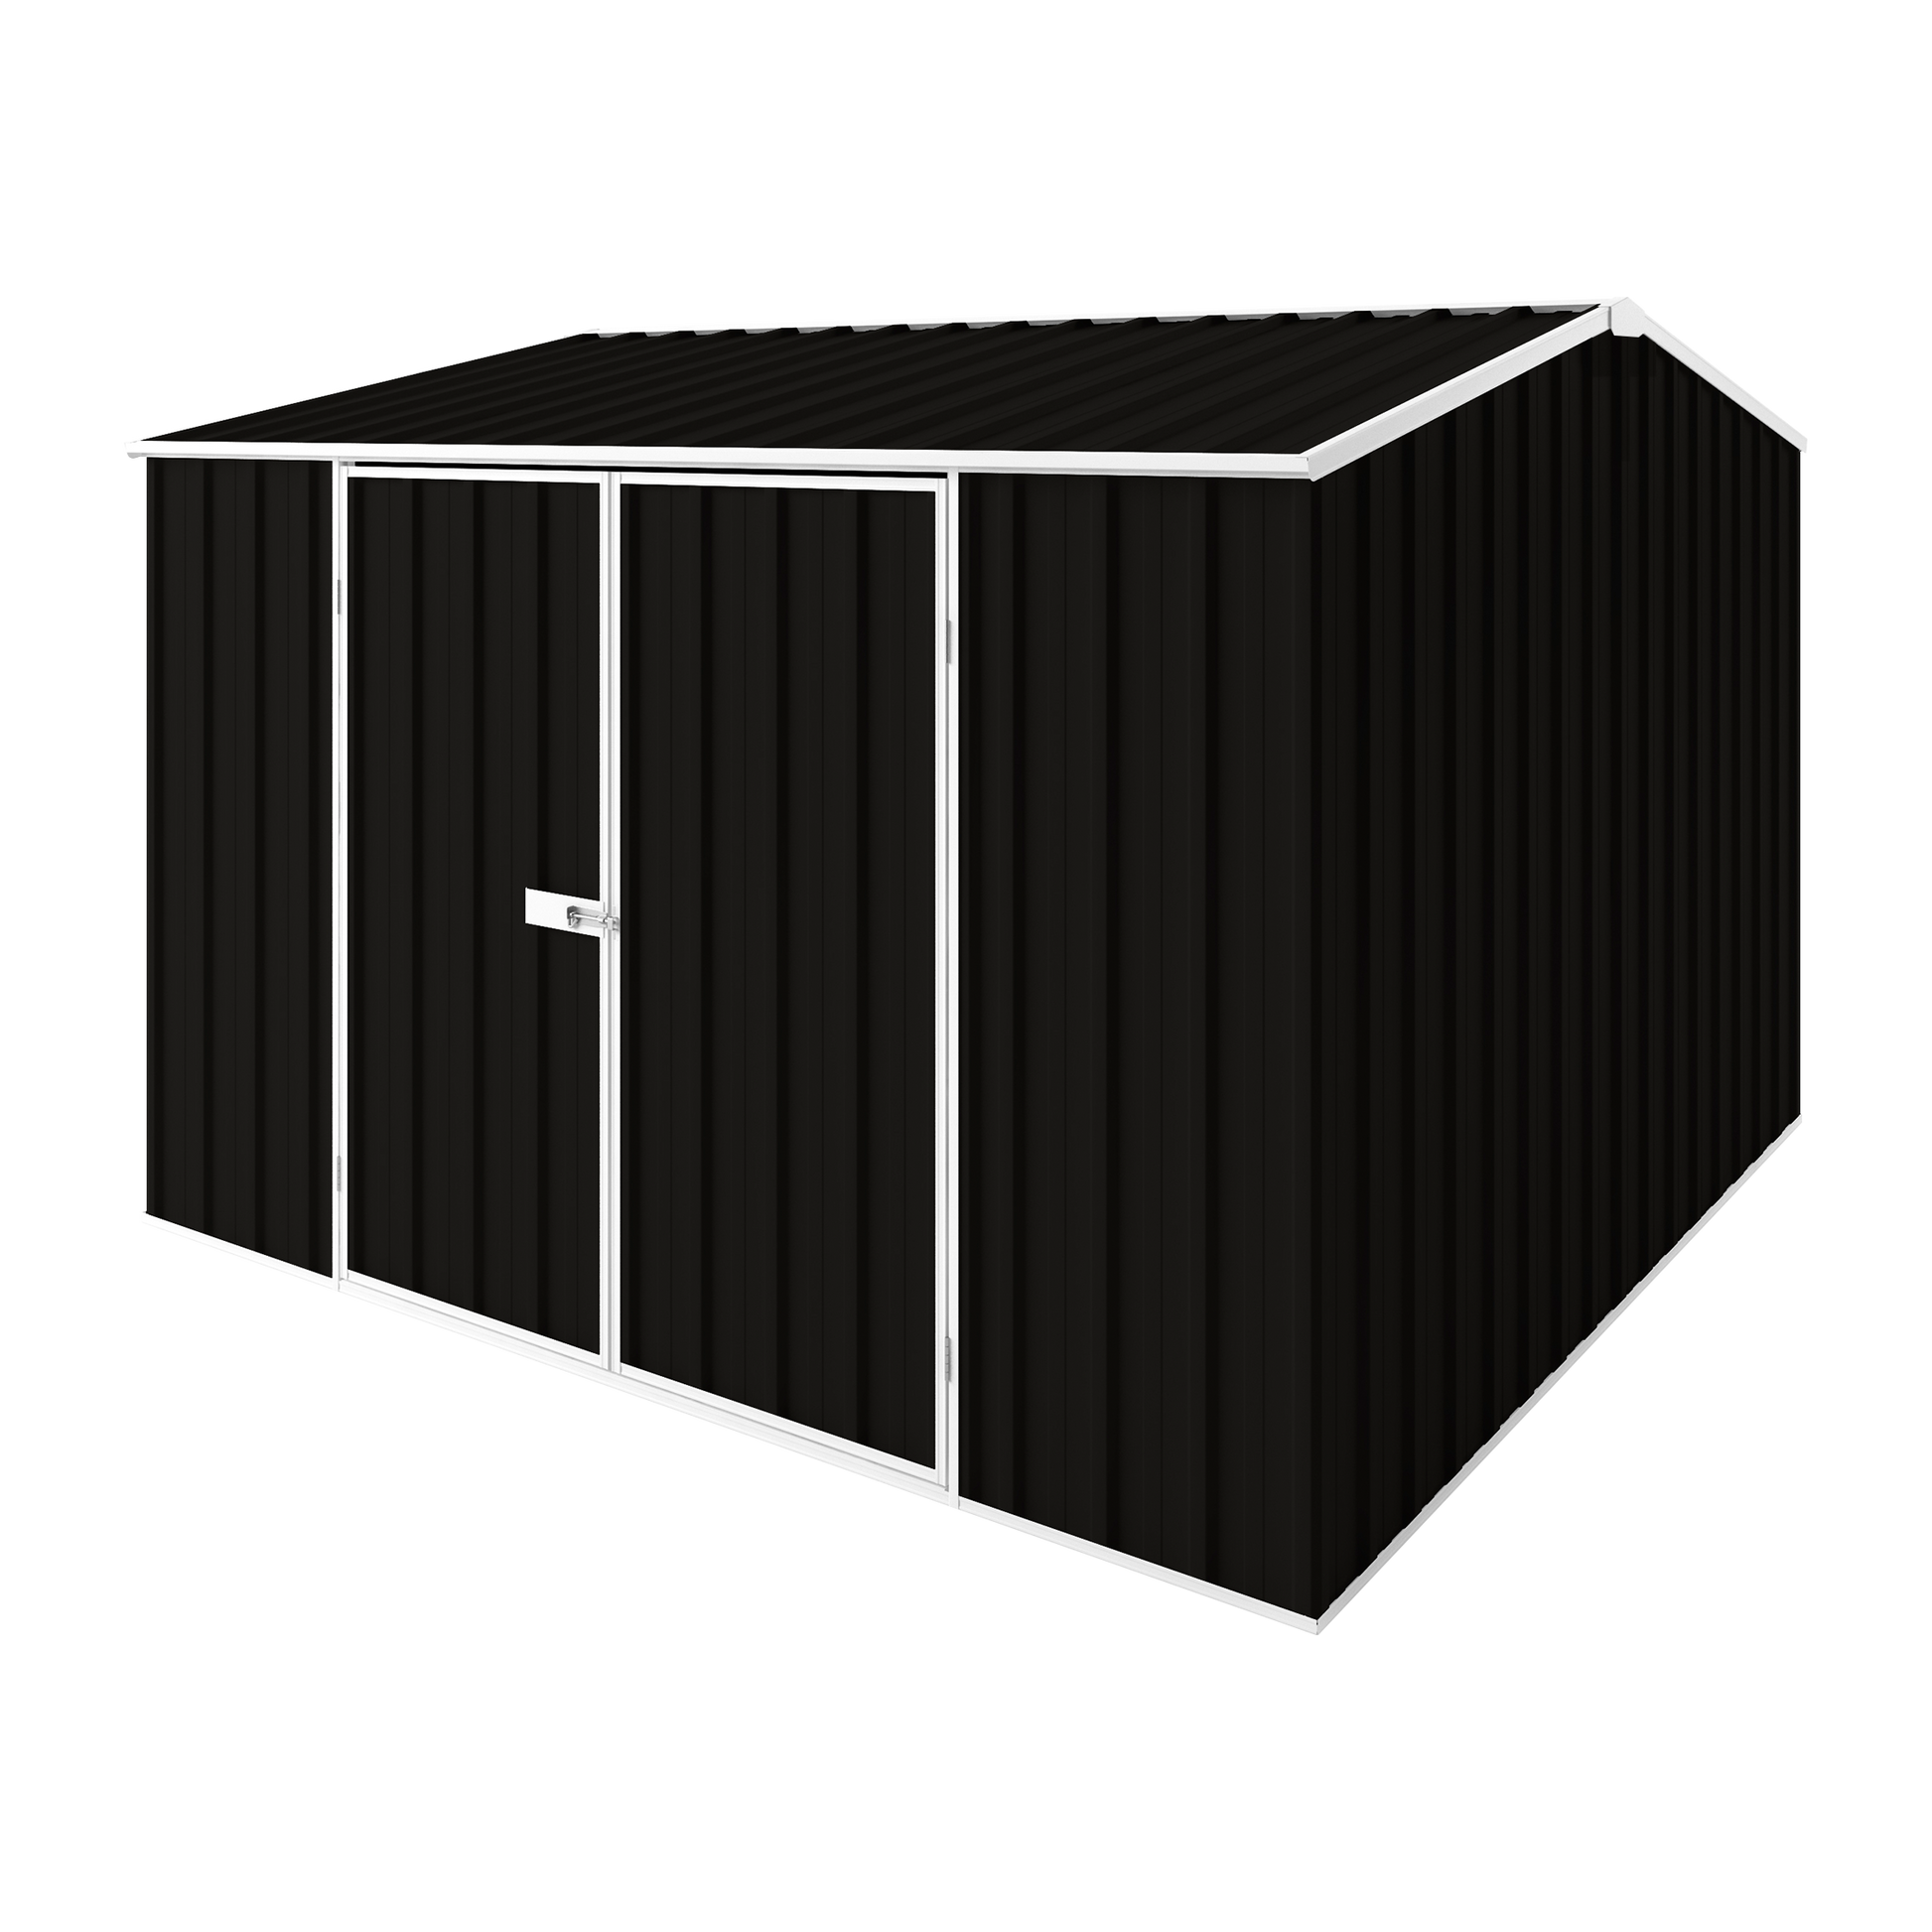 3m x 3m Gable Roof Garden Shed - EasyShed